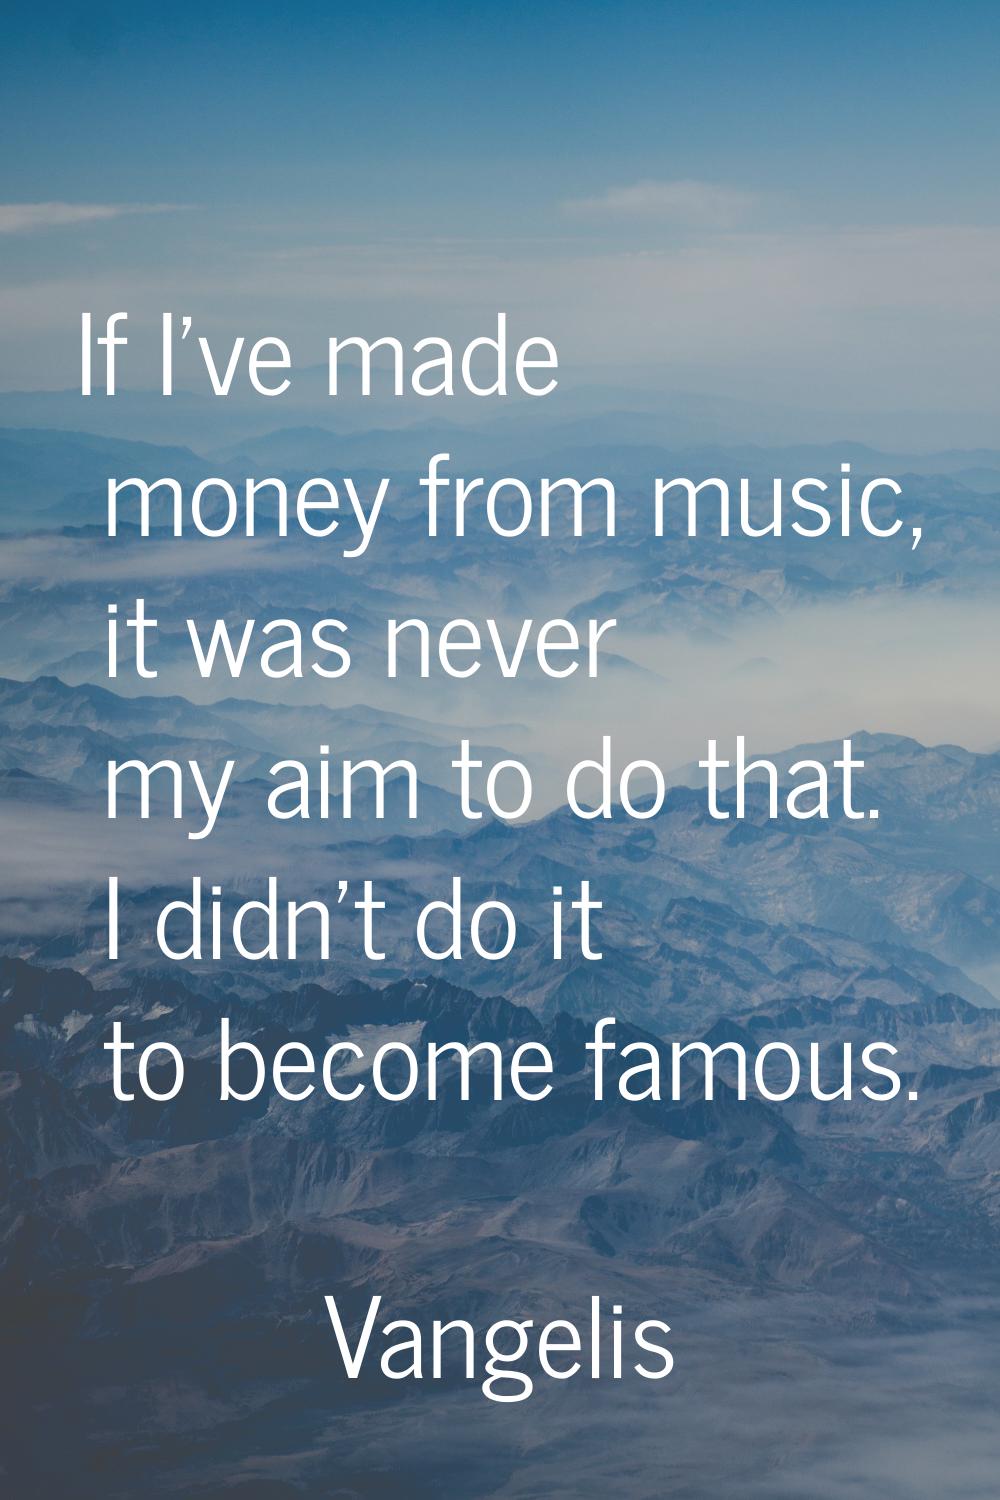 If I've made money from music, it was never my aim to do that. I didn't do it to become famous.